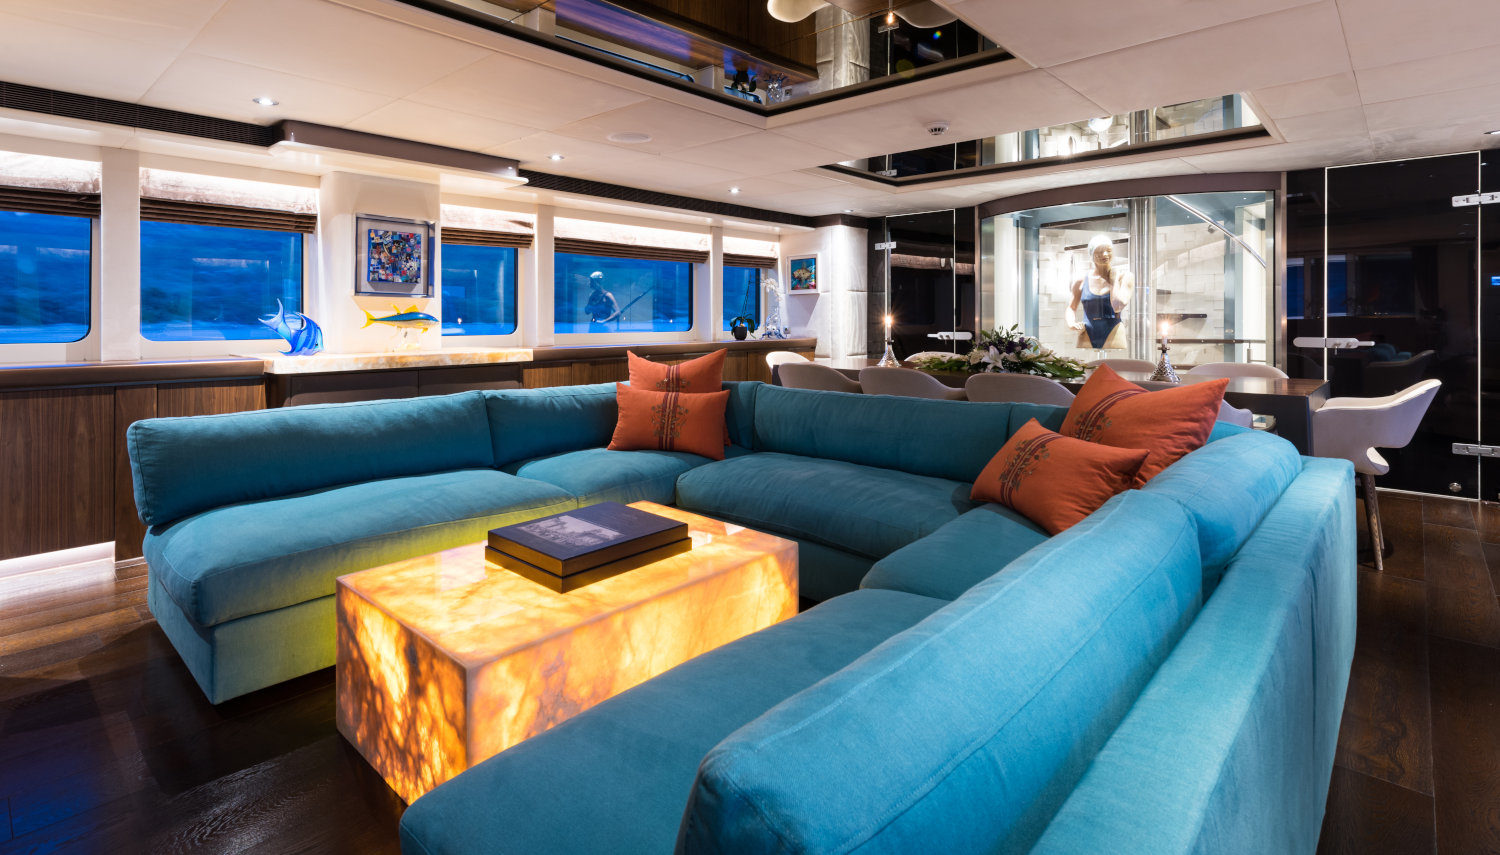 Vripack - Refit AlumerciA - Interior design of a family yacht - Image of the living area